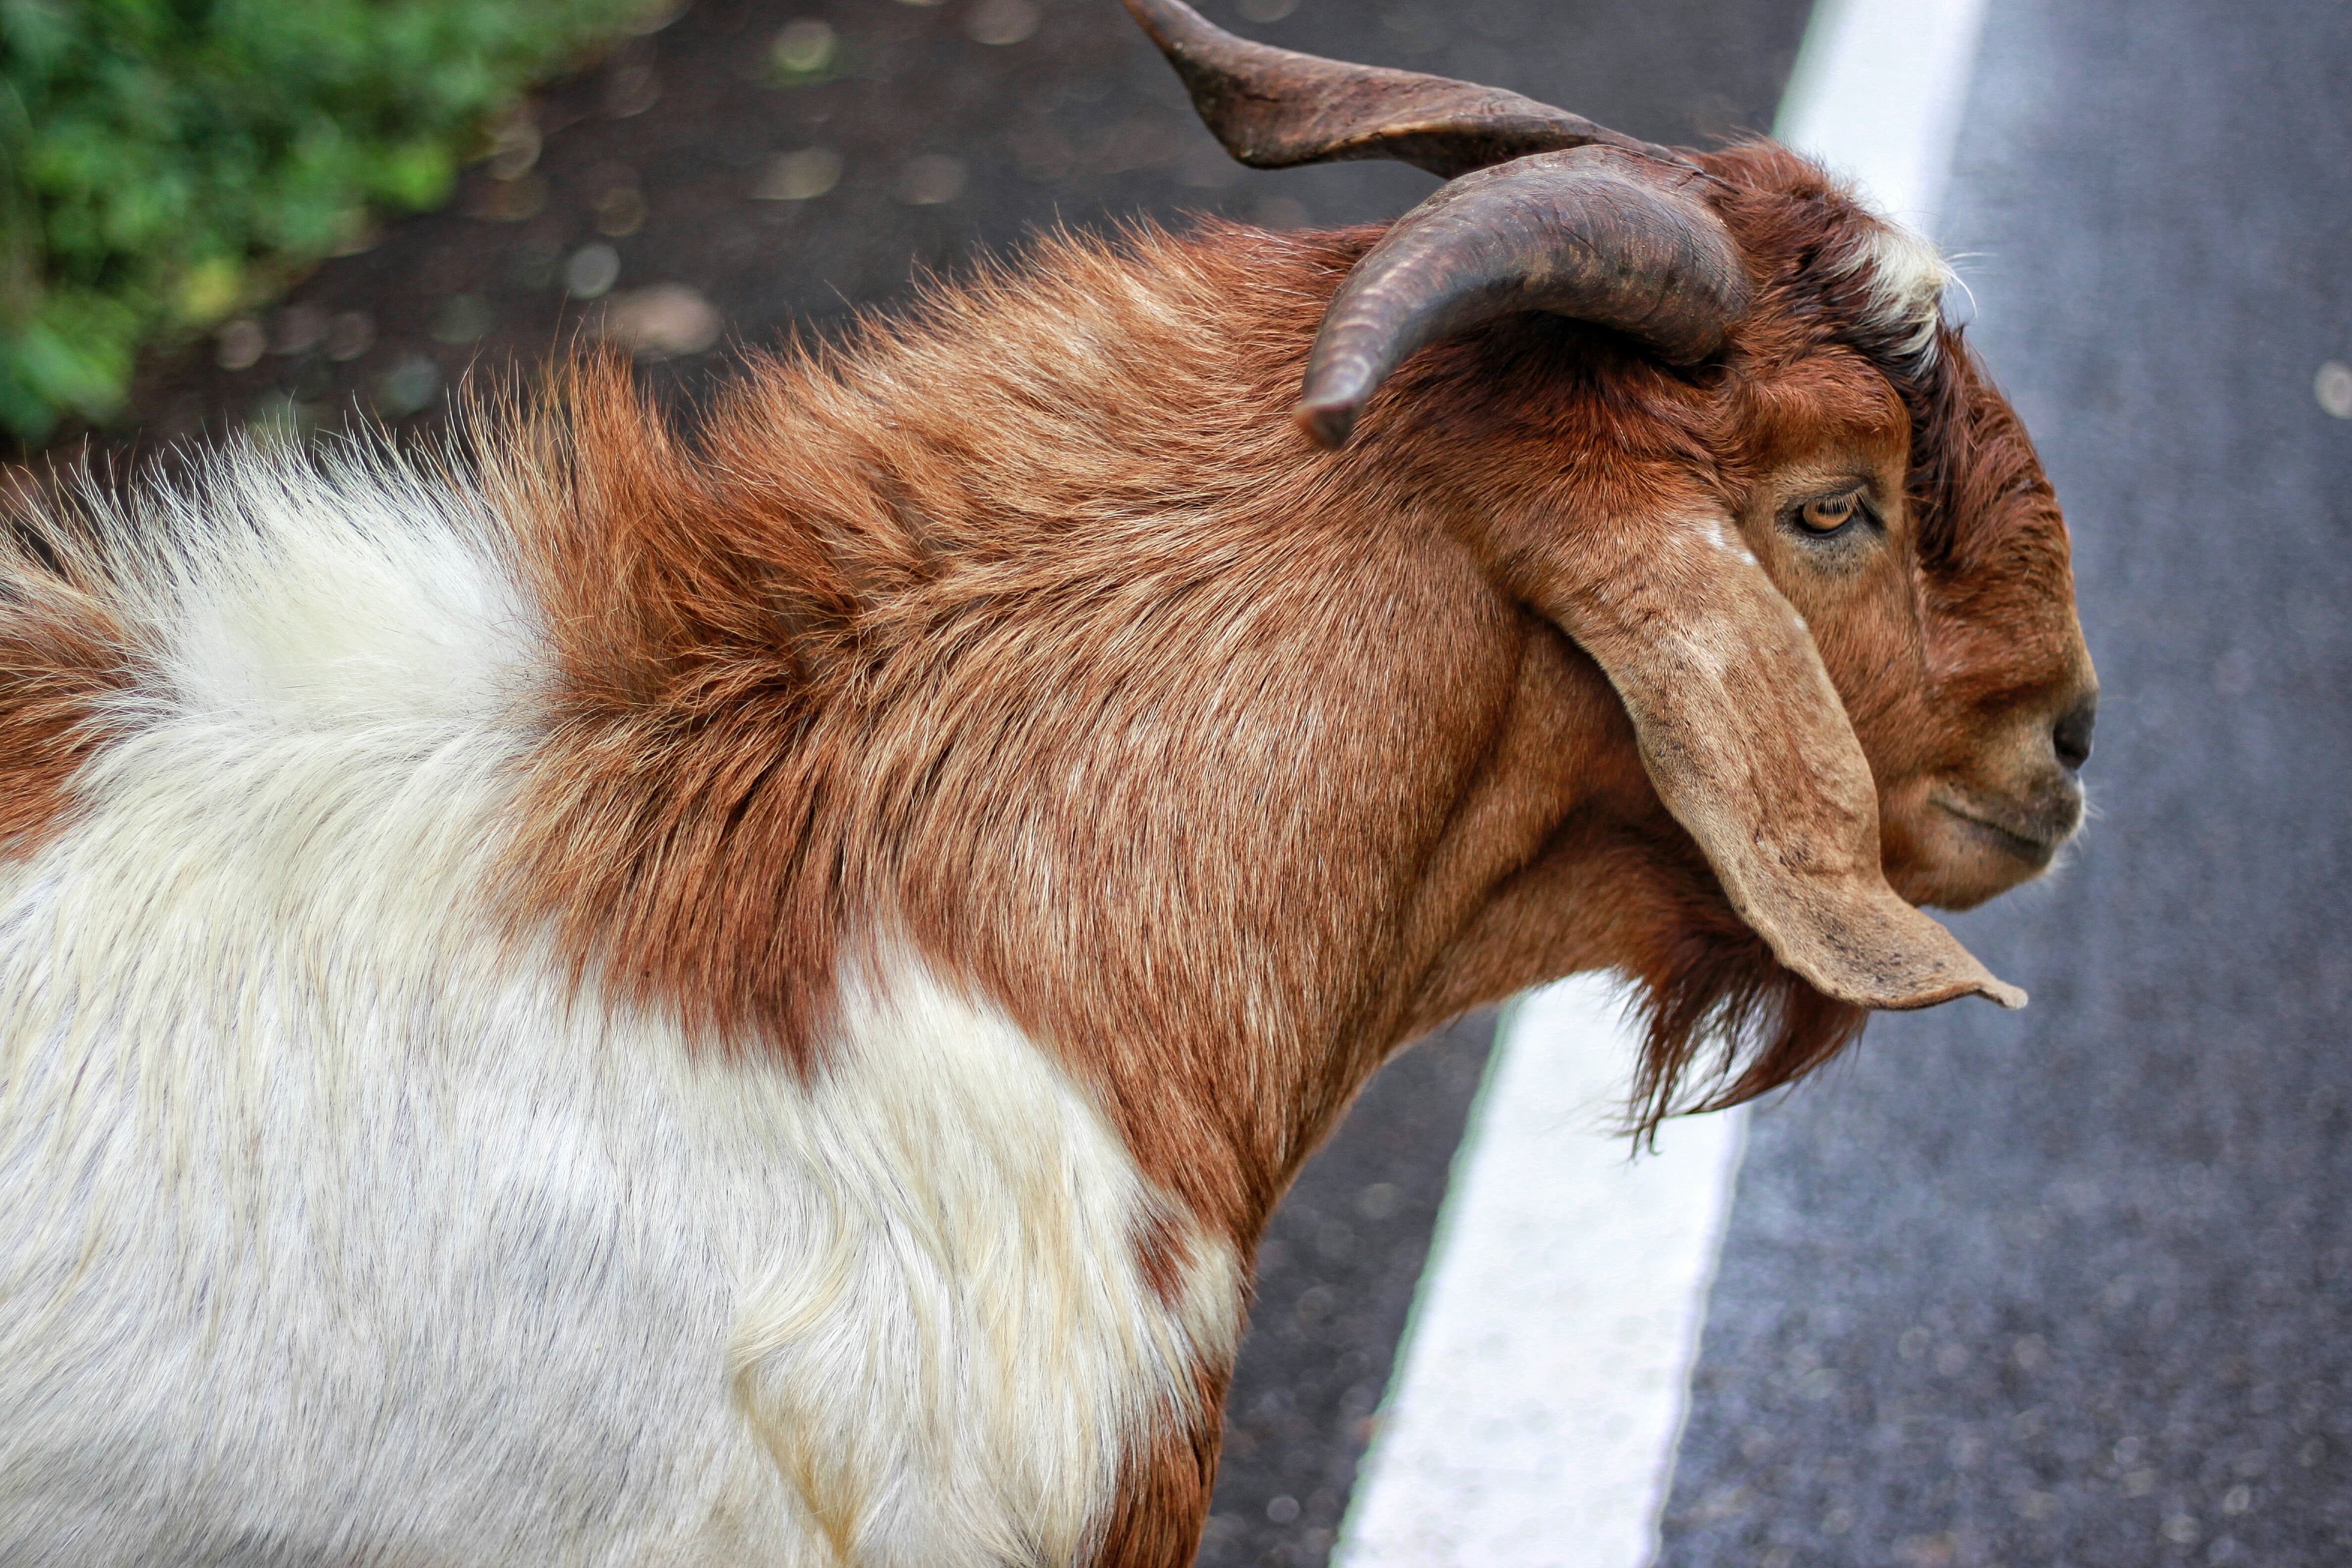 brown and white goat #goat #wool #animal #horns K #wallpaper #hdwallpaper #desktop. Animal wallpaper, Animals, Wool animals